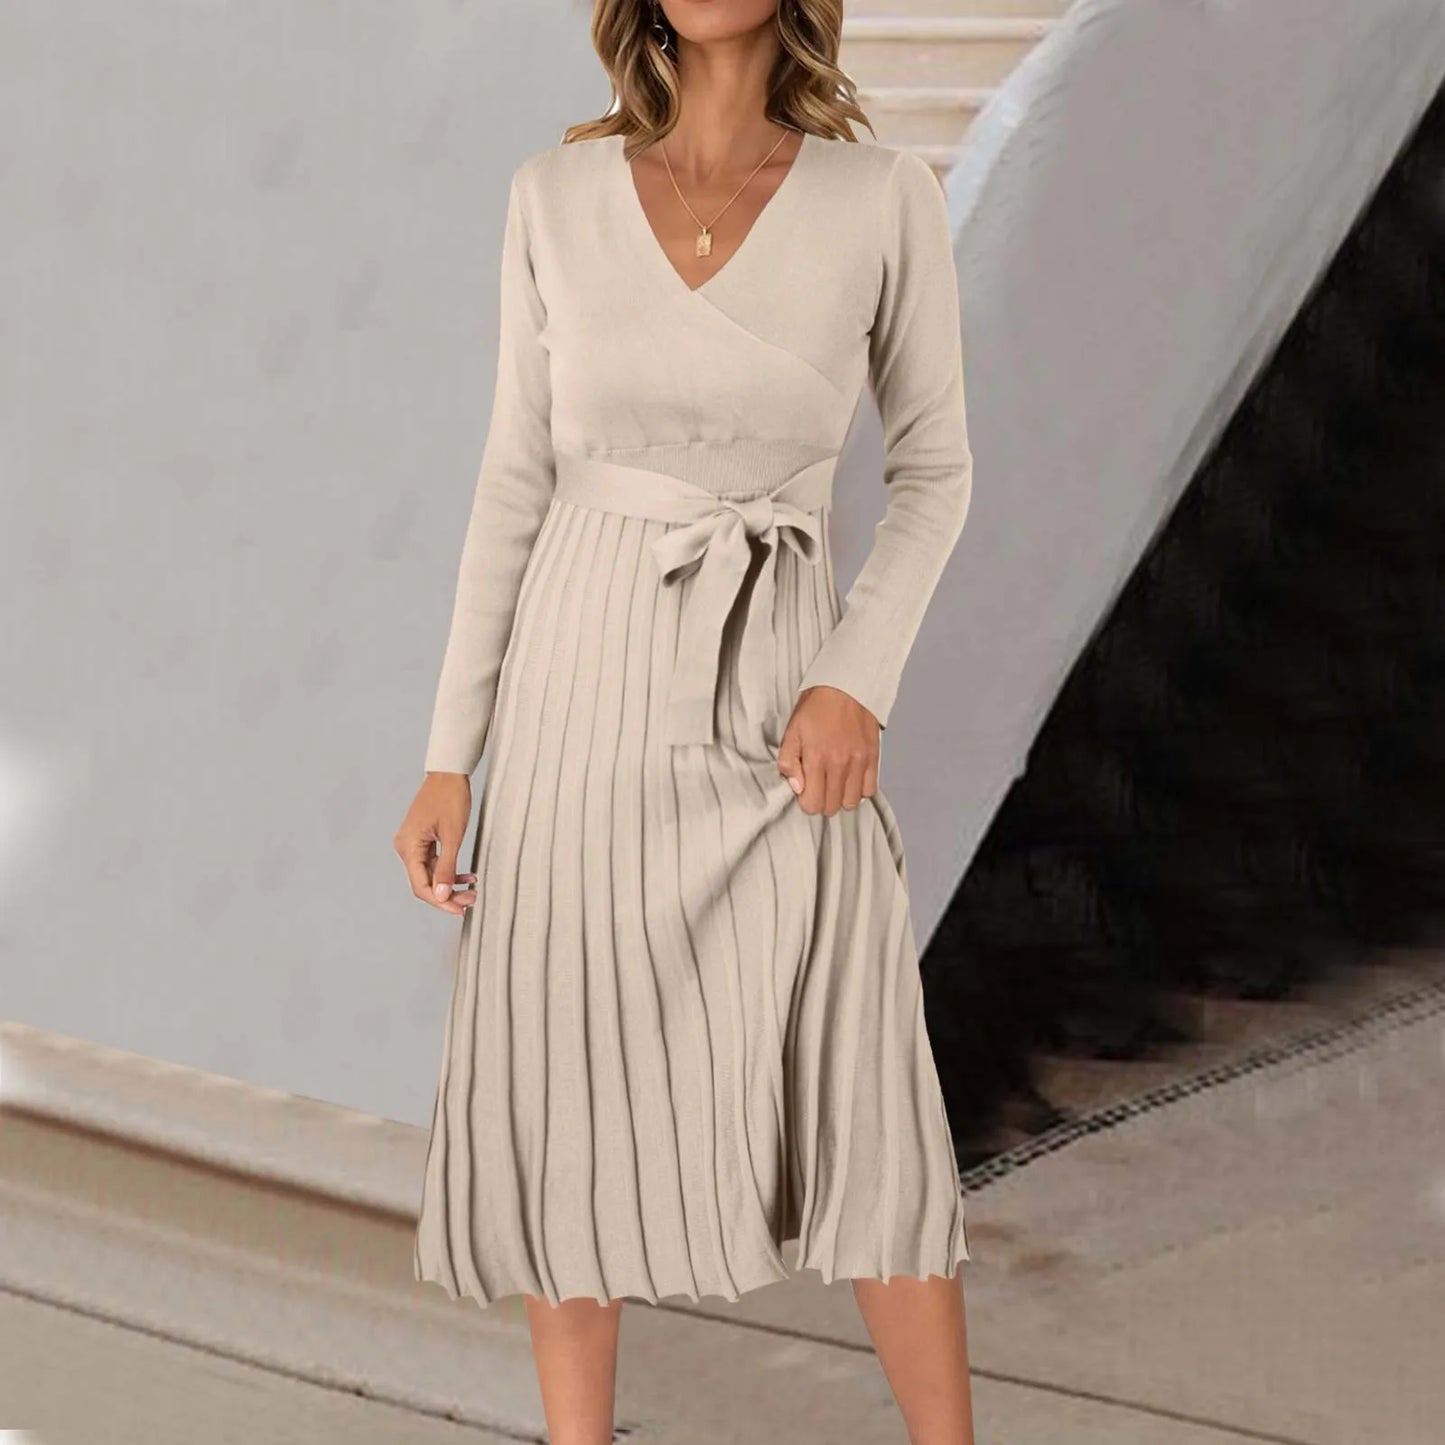 FashionSierra - Women Wrap V Neck Sweater Solid Color Long Sleeve Pleated Midi With Belt Autumn Ladies Pleated Dress For Work